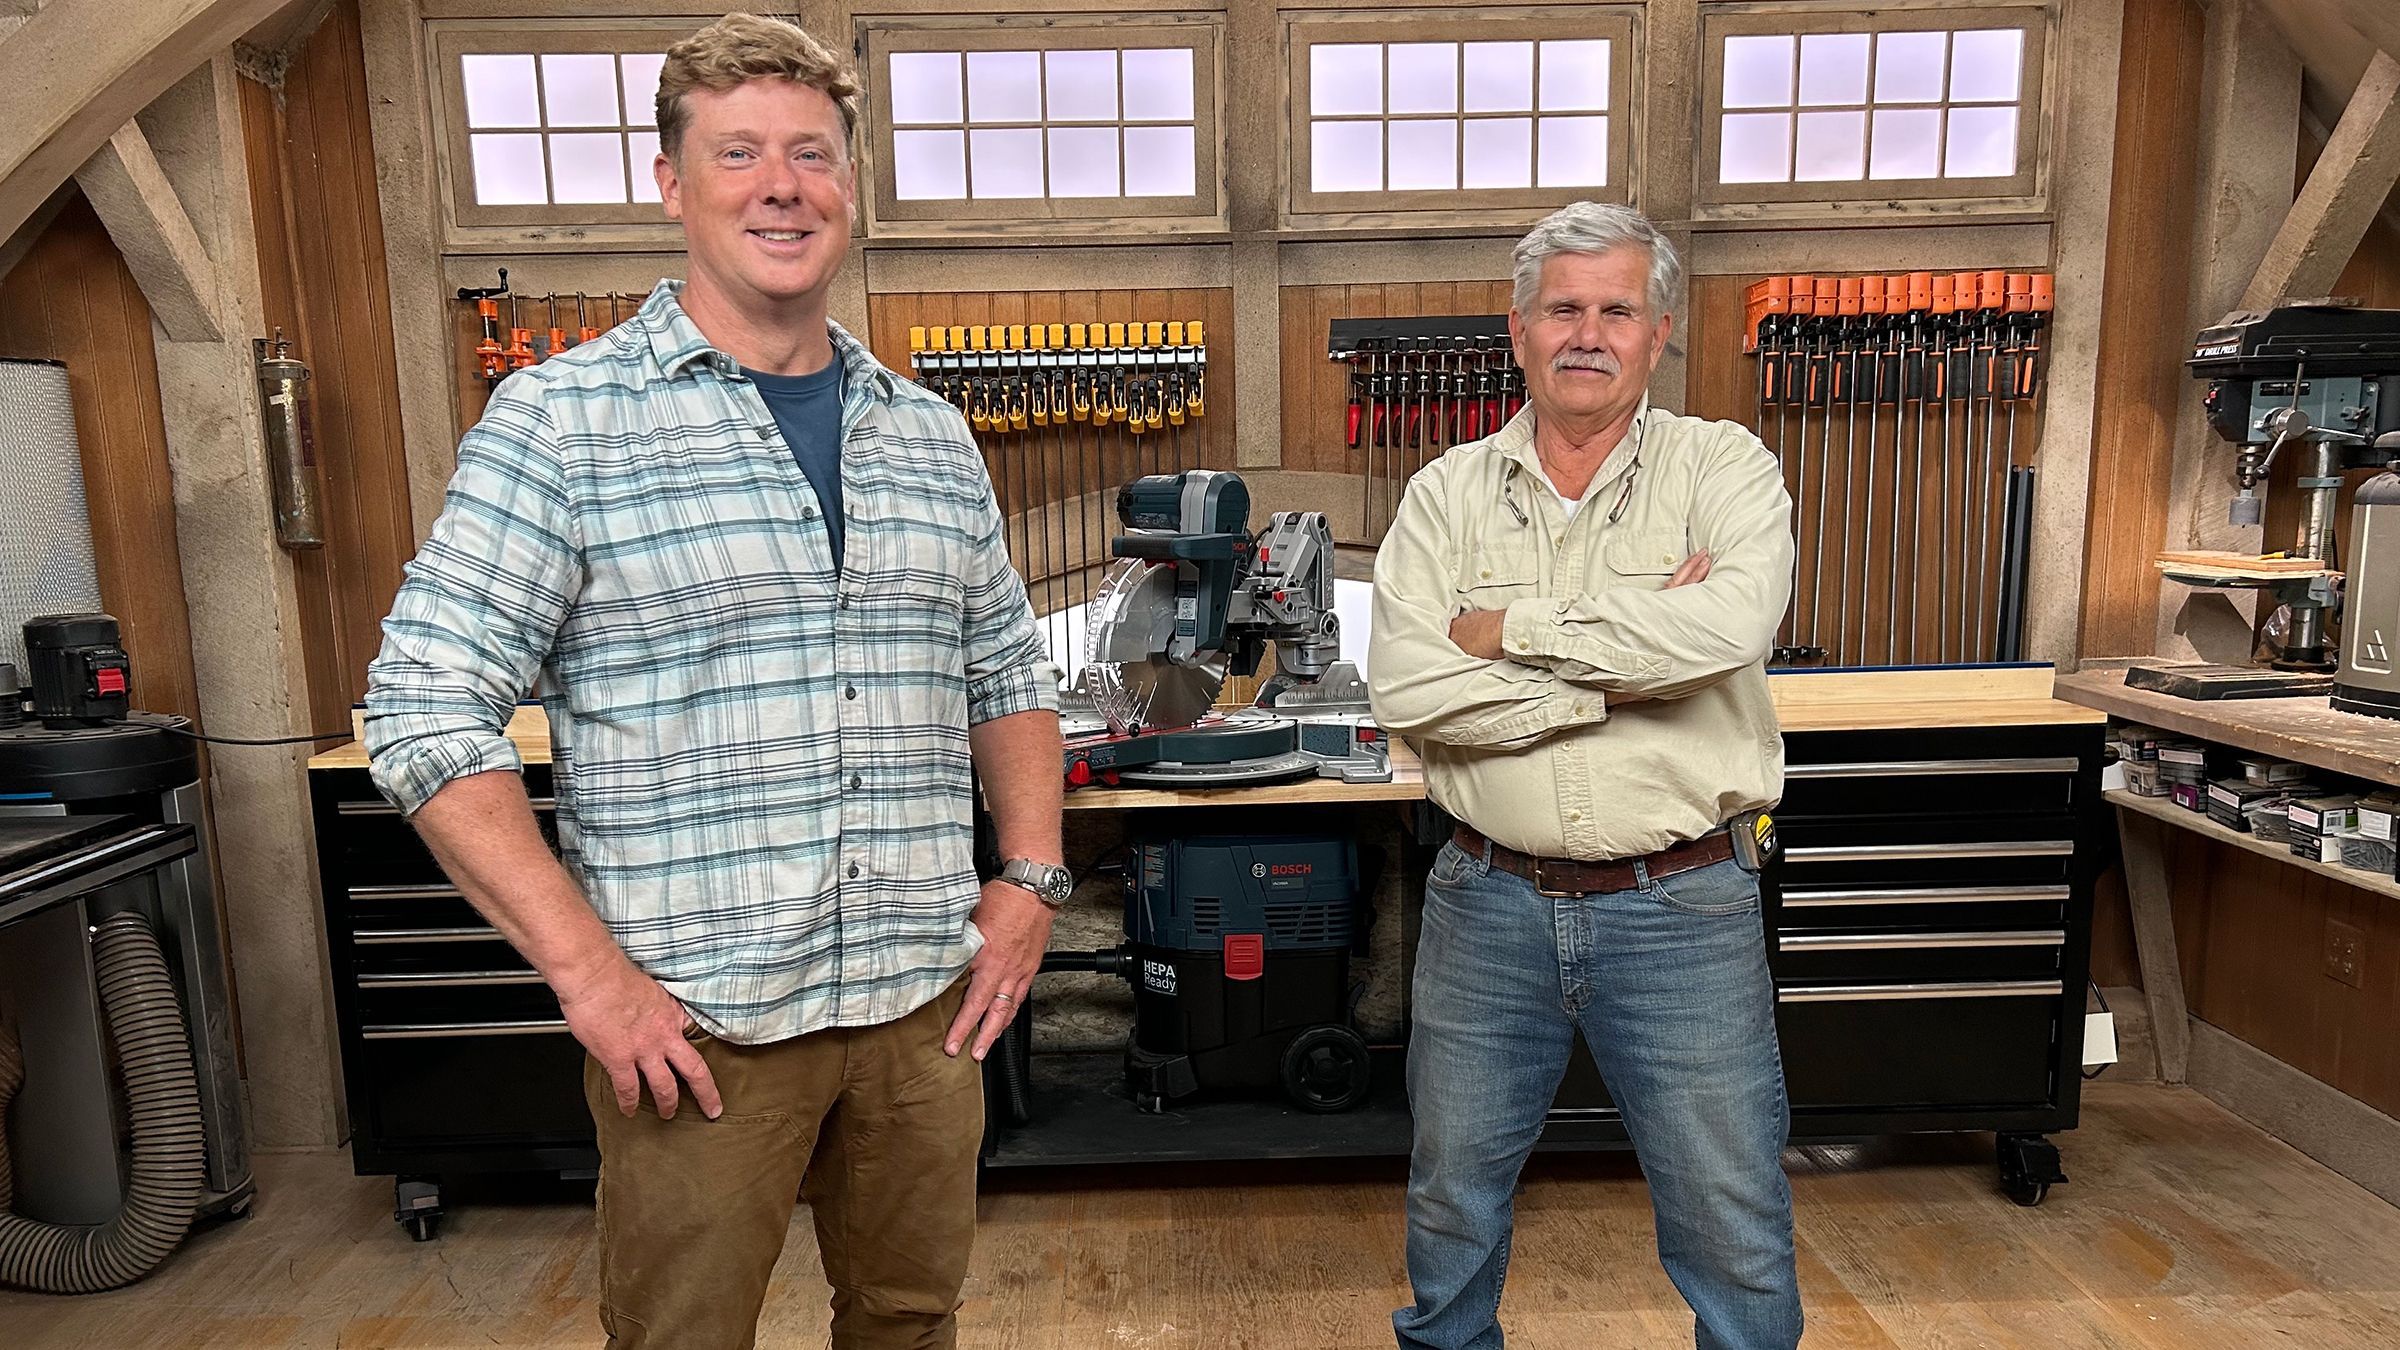 S22 E8: Tom Silva and Kevin O'Connor build a miter station